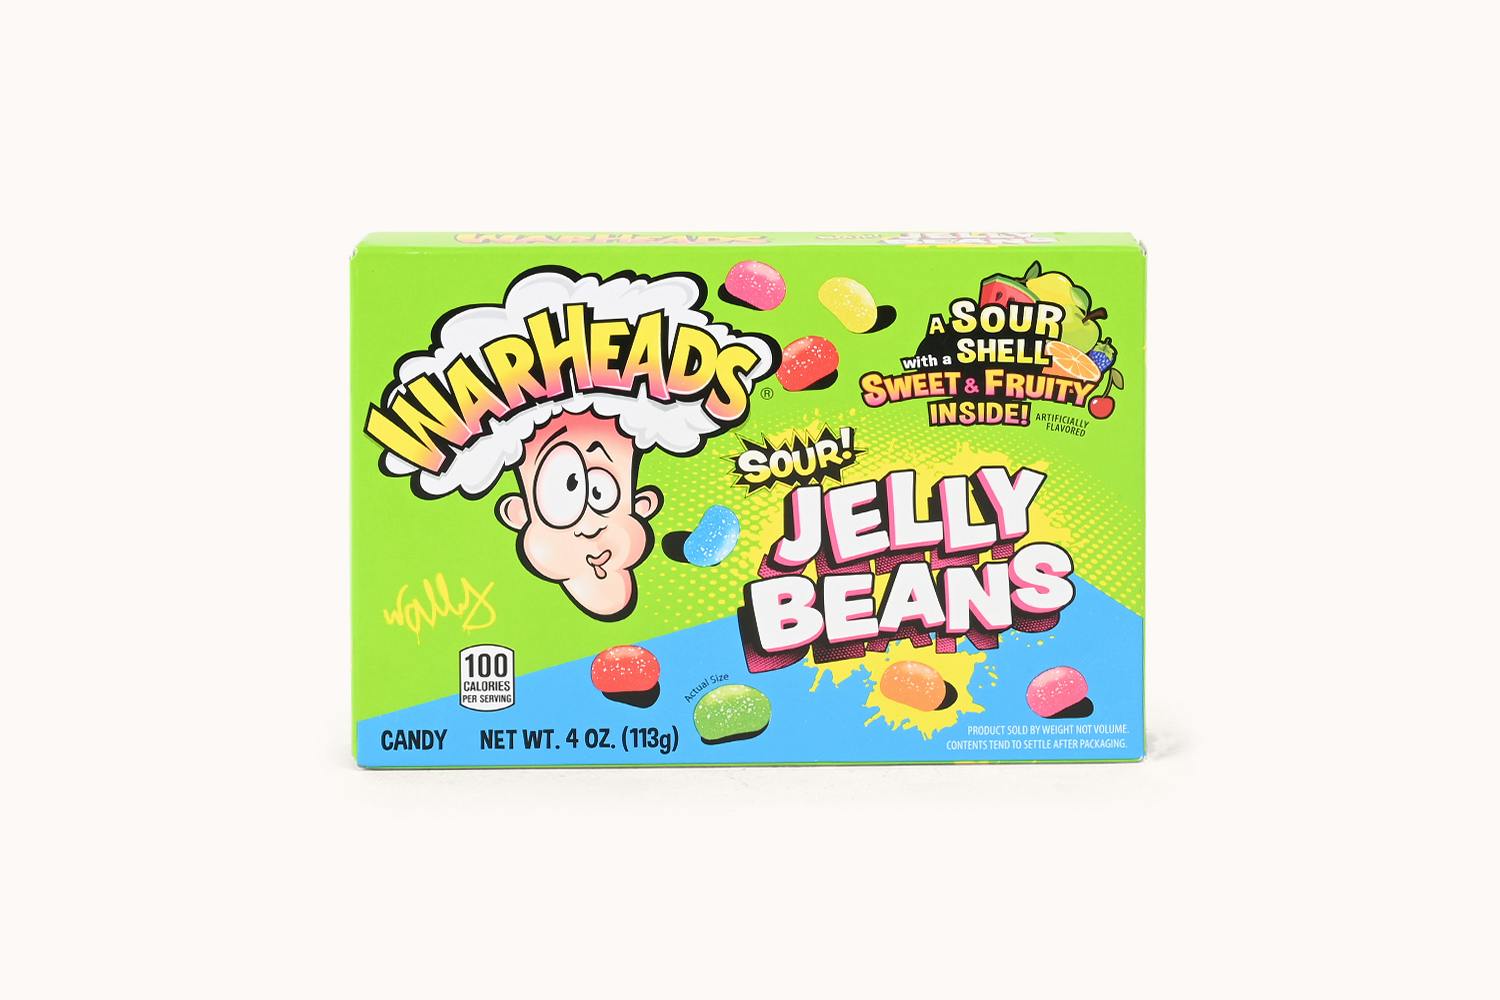 Warhead Sour Jelly Beans - Theater Box